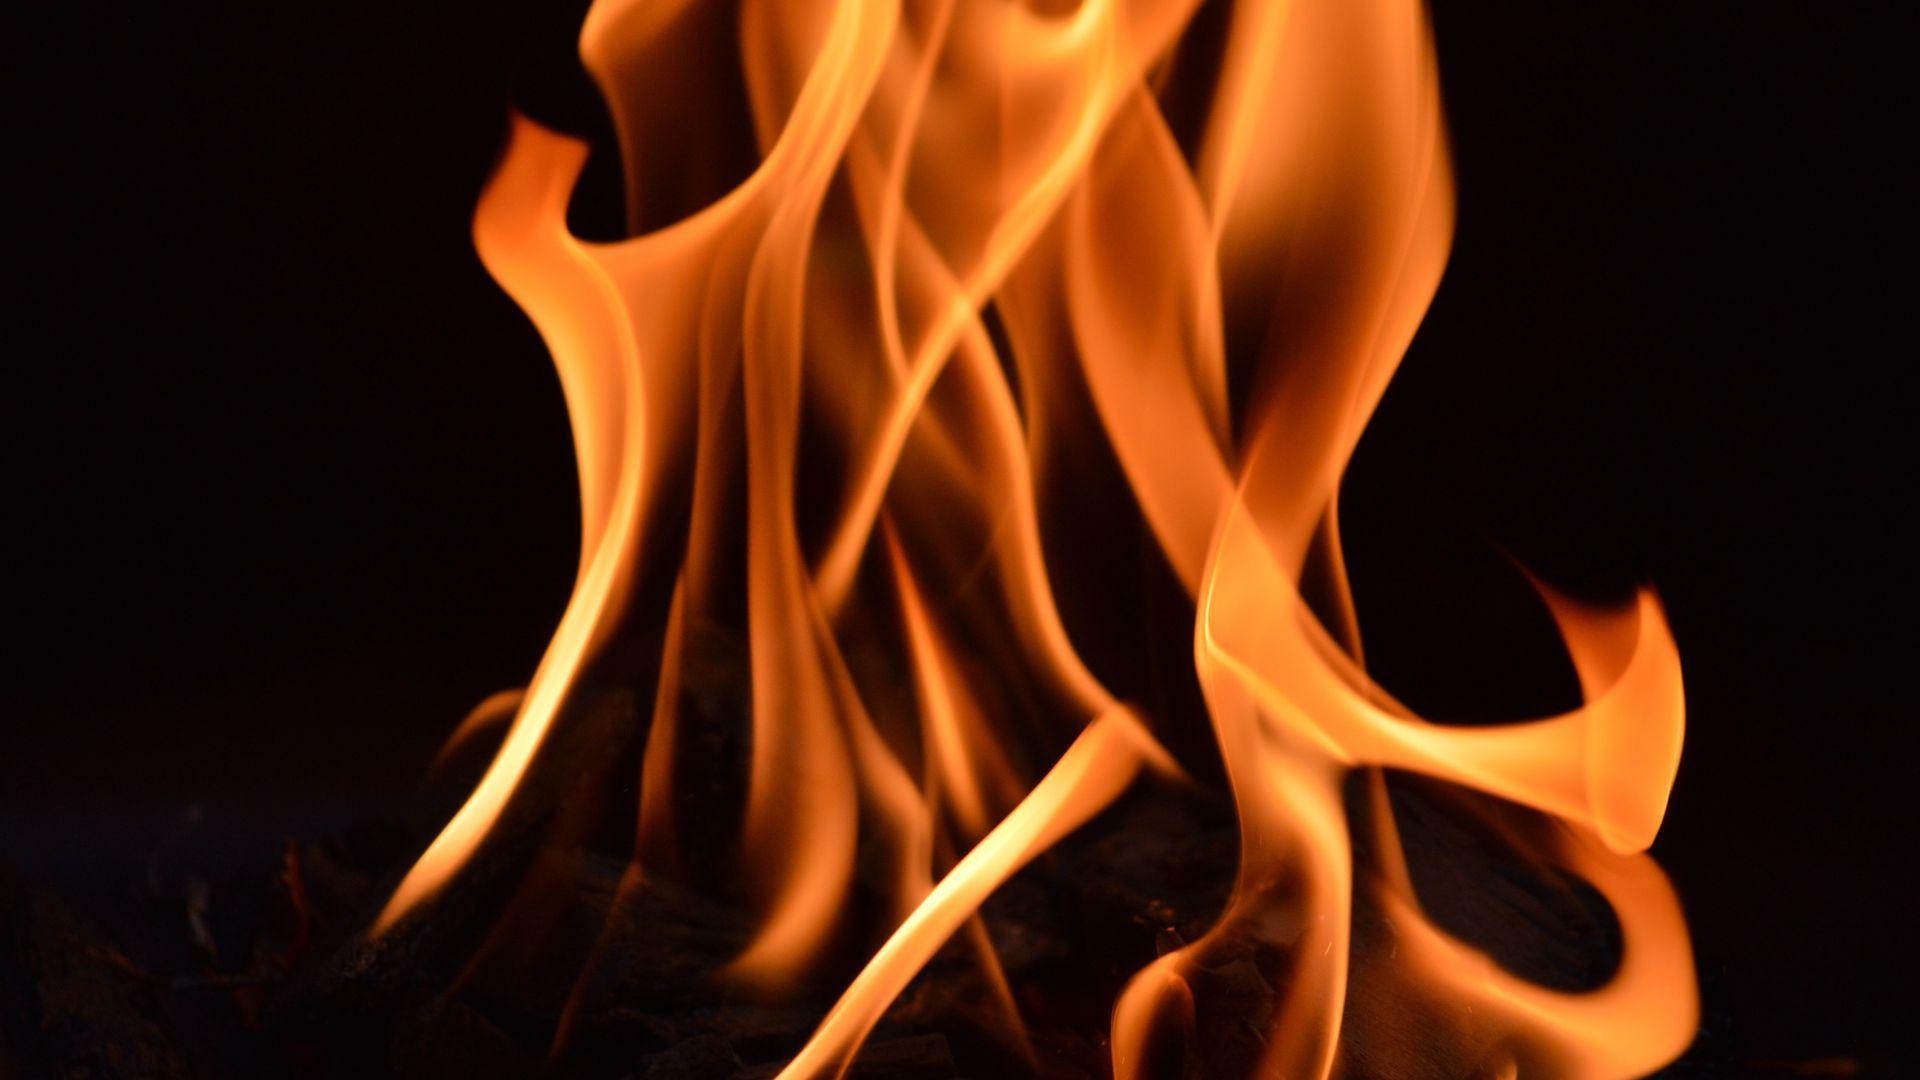 Full HD Fire Wallpapers - Top Free Full HD Fire Backgrounds